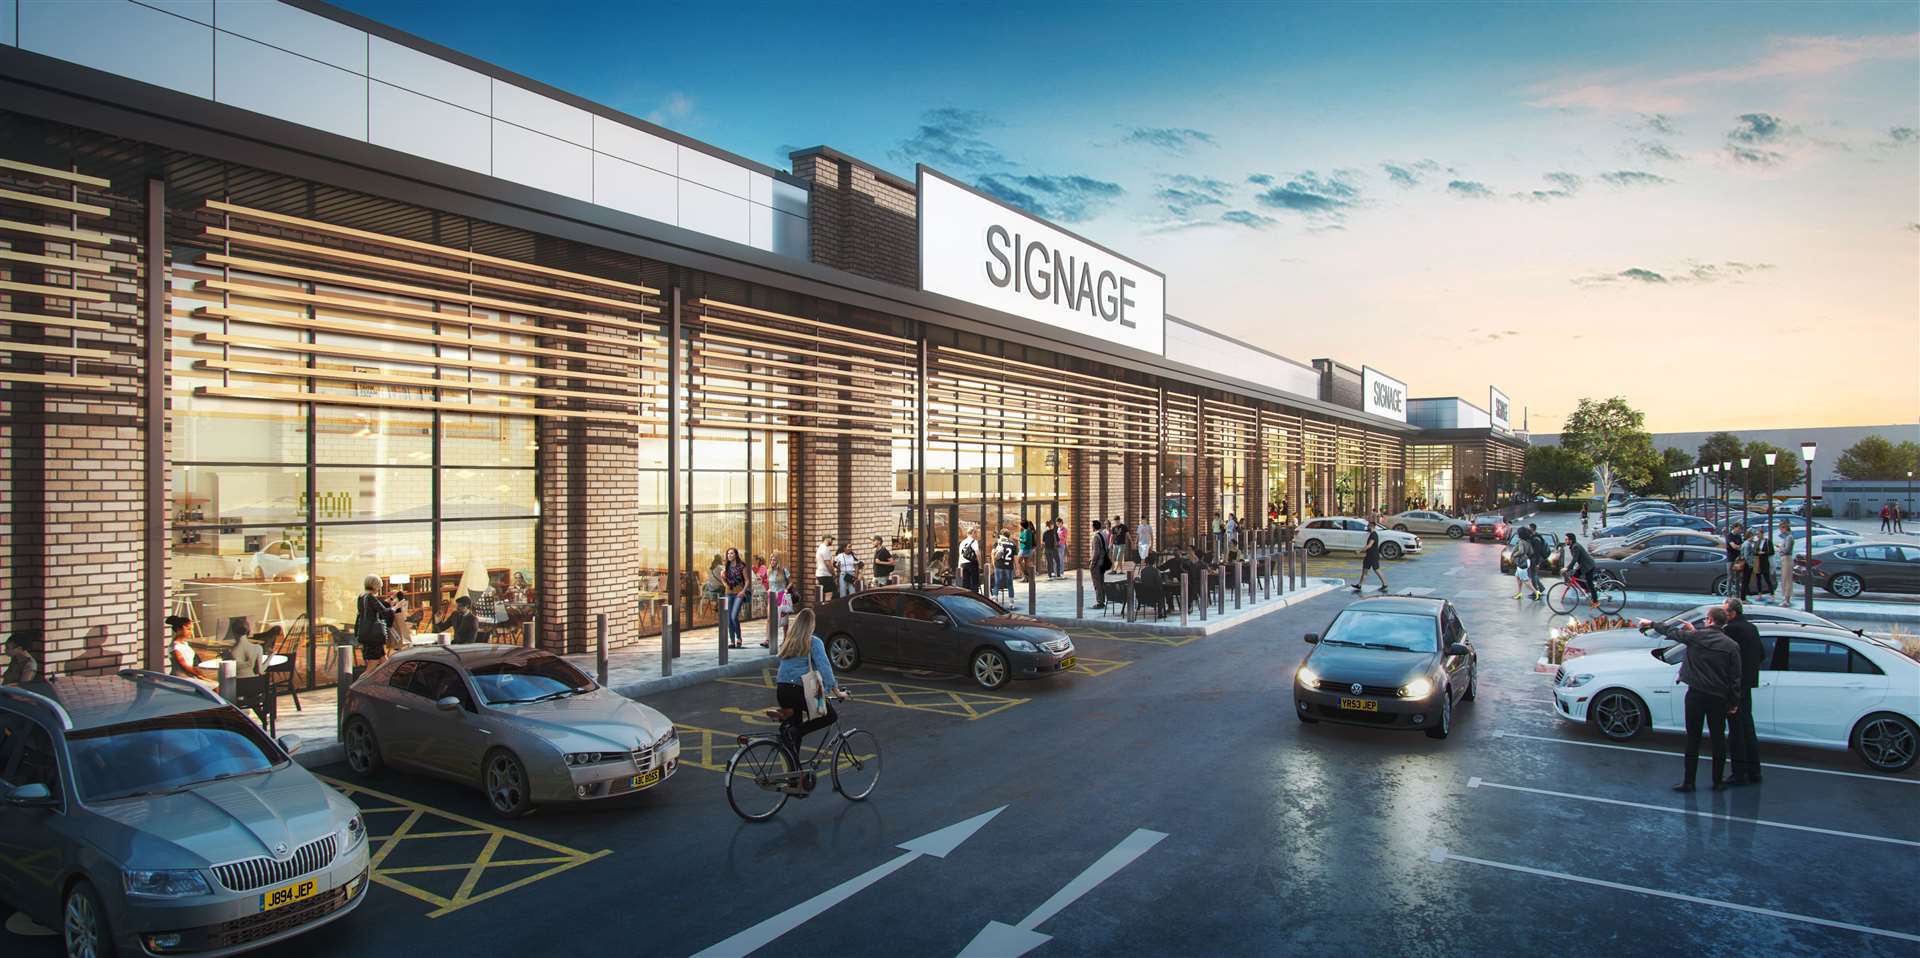 How the new retail development could look. Picture: Corstorphine & Wright